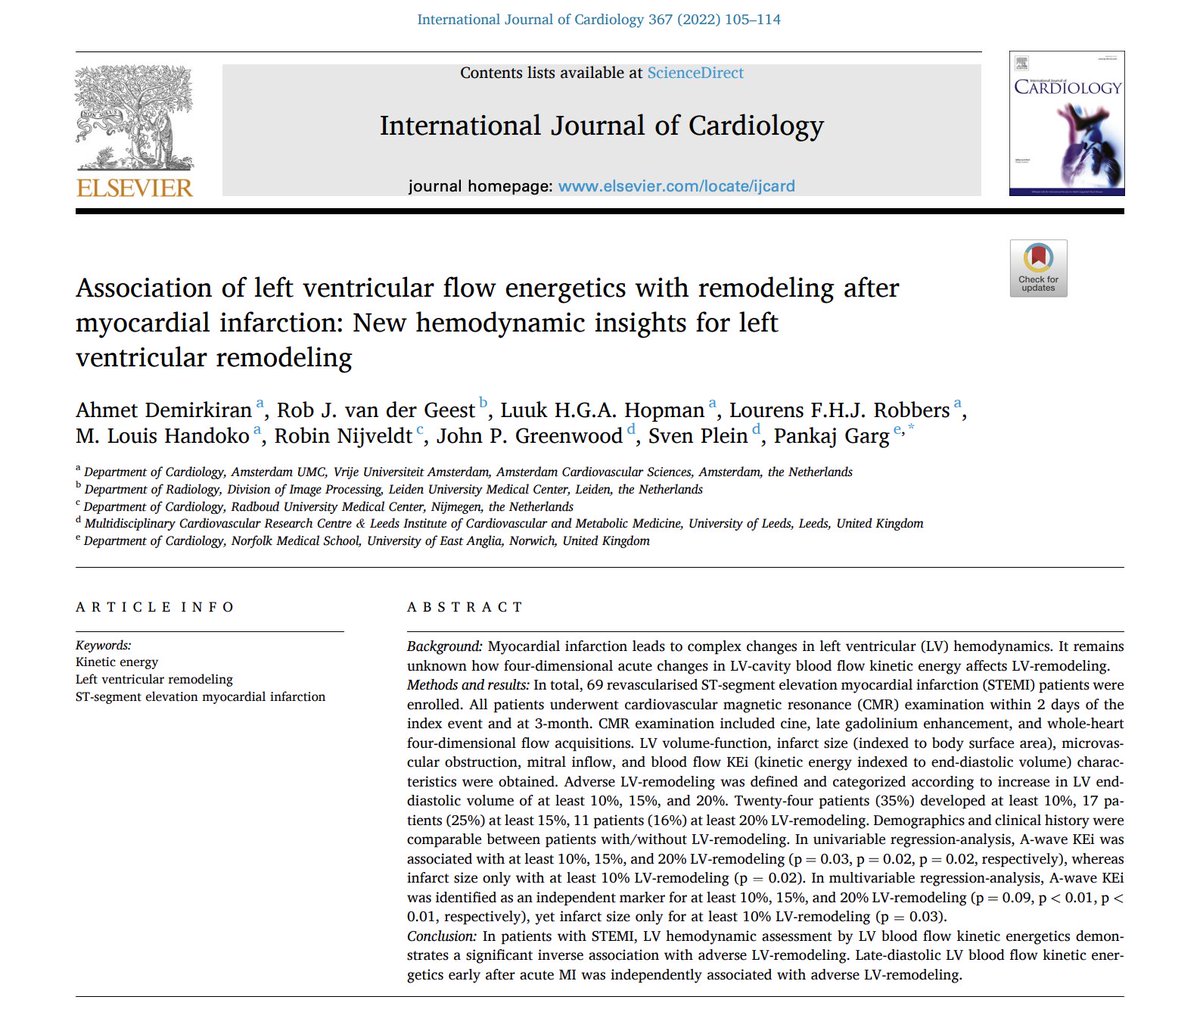 Excited to share our latest groundbreaking findings!

'Left ventricular flow energetics are linked to post-myocardial infarction remodeling.'

internationaljournalofcardiology.com/article/S0167-…

Thanks to the research team, in particular @HEARTinMagnet @RNijveldt @sven_plein

@whyCMR @Cardiac_MRI #4Dflow